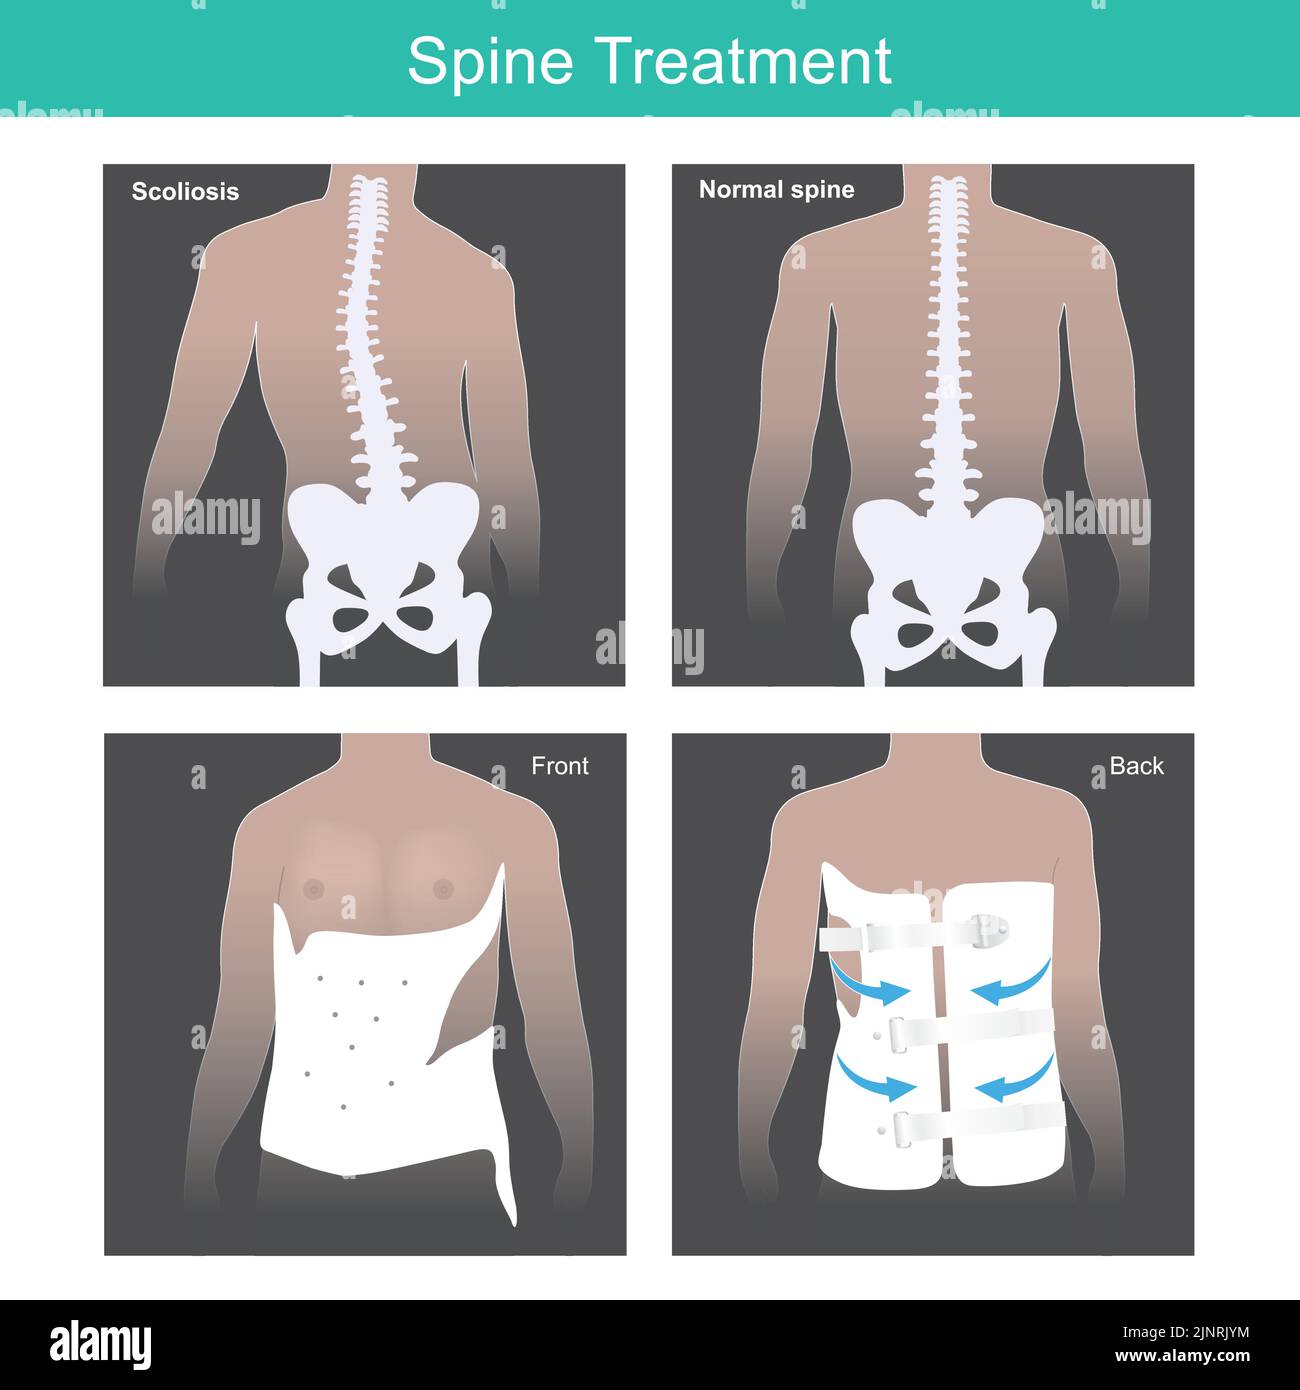 Spine Treatment. He has abnormal spine and after medical usage tool treatment. Illustration anatomy body. Stock Vector